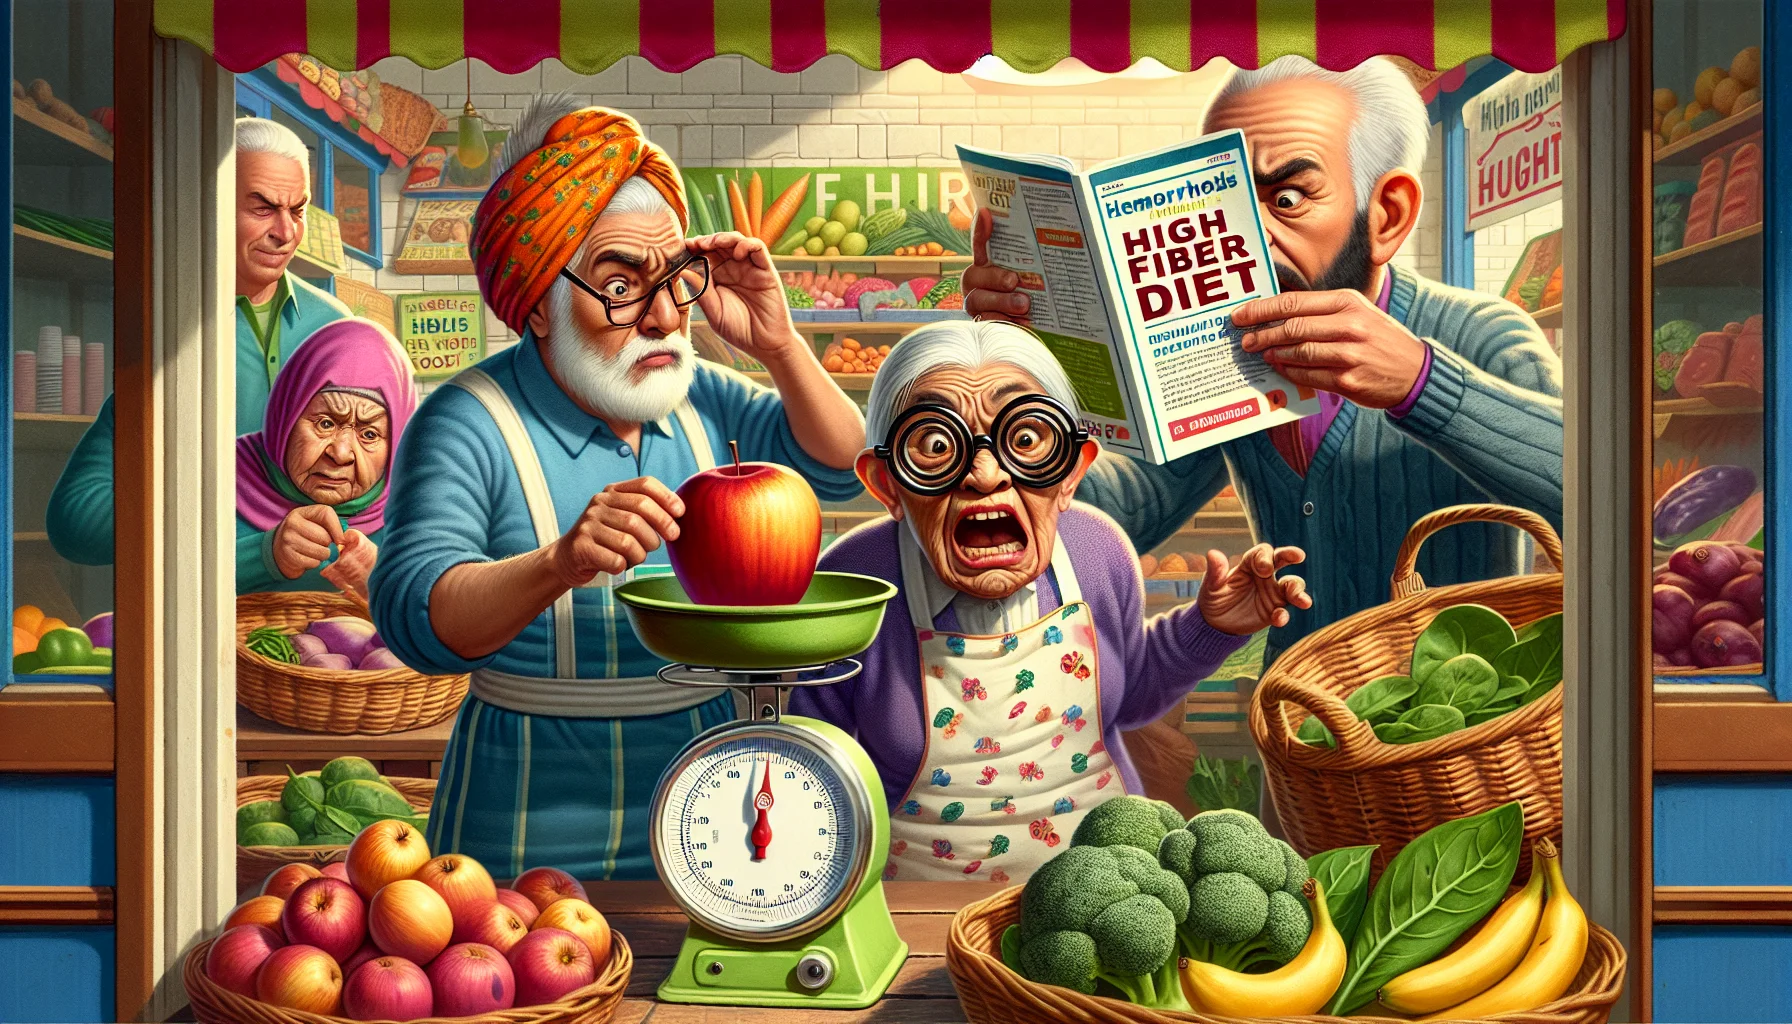 Create a humorous yet realistic scene centered around high fiber foods beneficial for hemorrhoids. Imagine an elderly Caucasian man meticulously weighing an apple on a vintage scale at a colorful fruit market stand, while an elderly Middle-Eastern woman, with a surprised look on her face, is reading a nutrition guide titled 'High Fiber Diet' which just flew open due to a sudden gust of wind. Meanwhile, a South Asian elderly person is trying out a pair of comically oversized glasses while scrutinizing a plate of spinach, broccoli and other green vegetables. The scene suggests a humorous take on the diet adjustments older people make for health reasons.